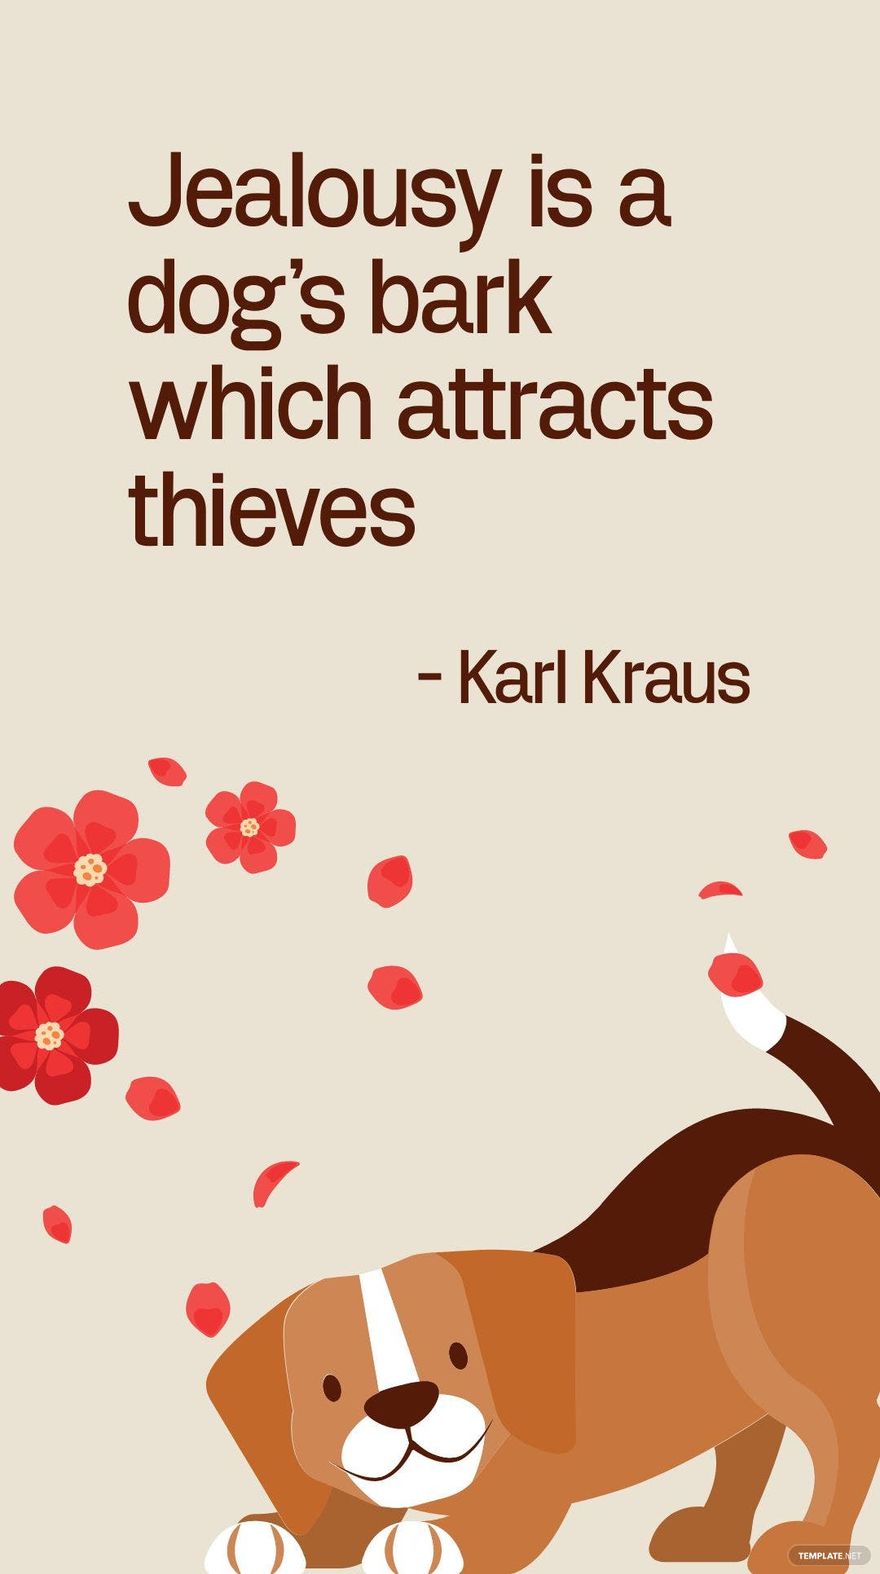 Free Karl Kraus - Jealousy is a dog's bark which attracts thieves in JPG